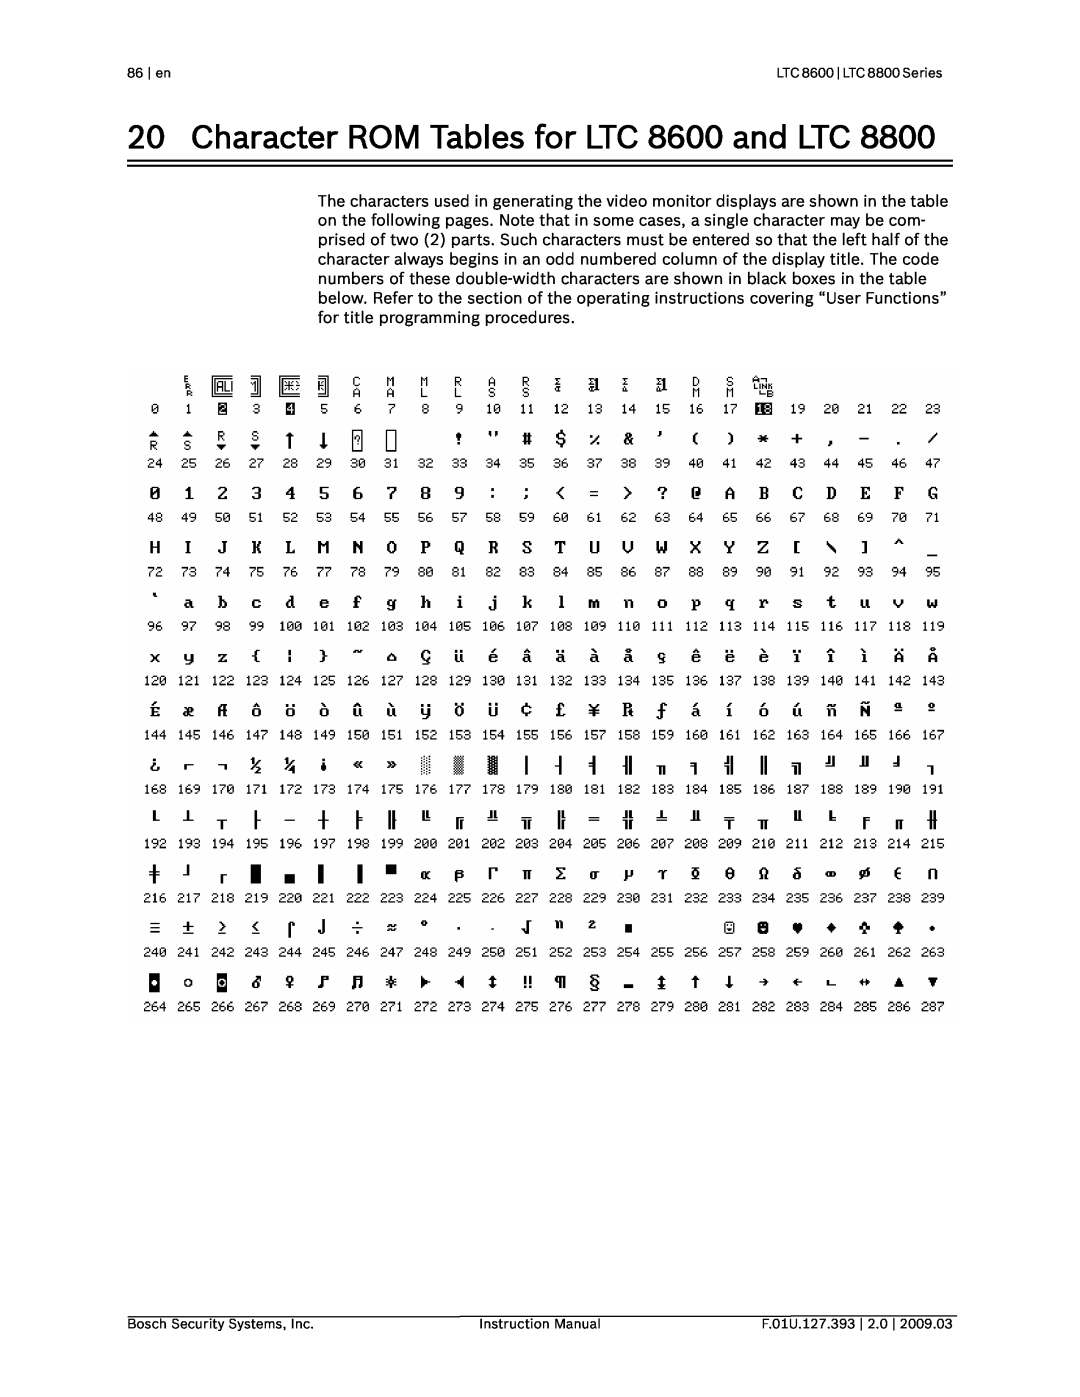 Bosch Appliances Character ROM Tables for LTC 8600 and LTC, 86 | en, Bosch Security Systems, Inc, Instruction Manual 